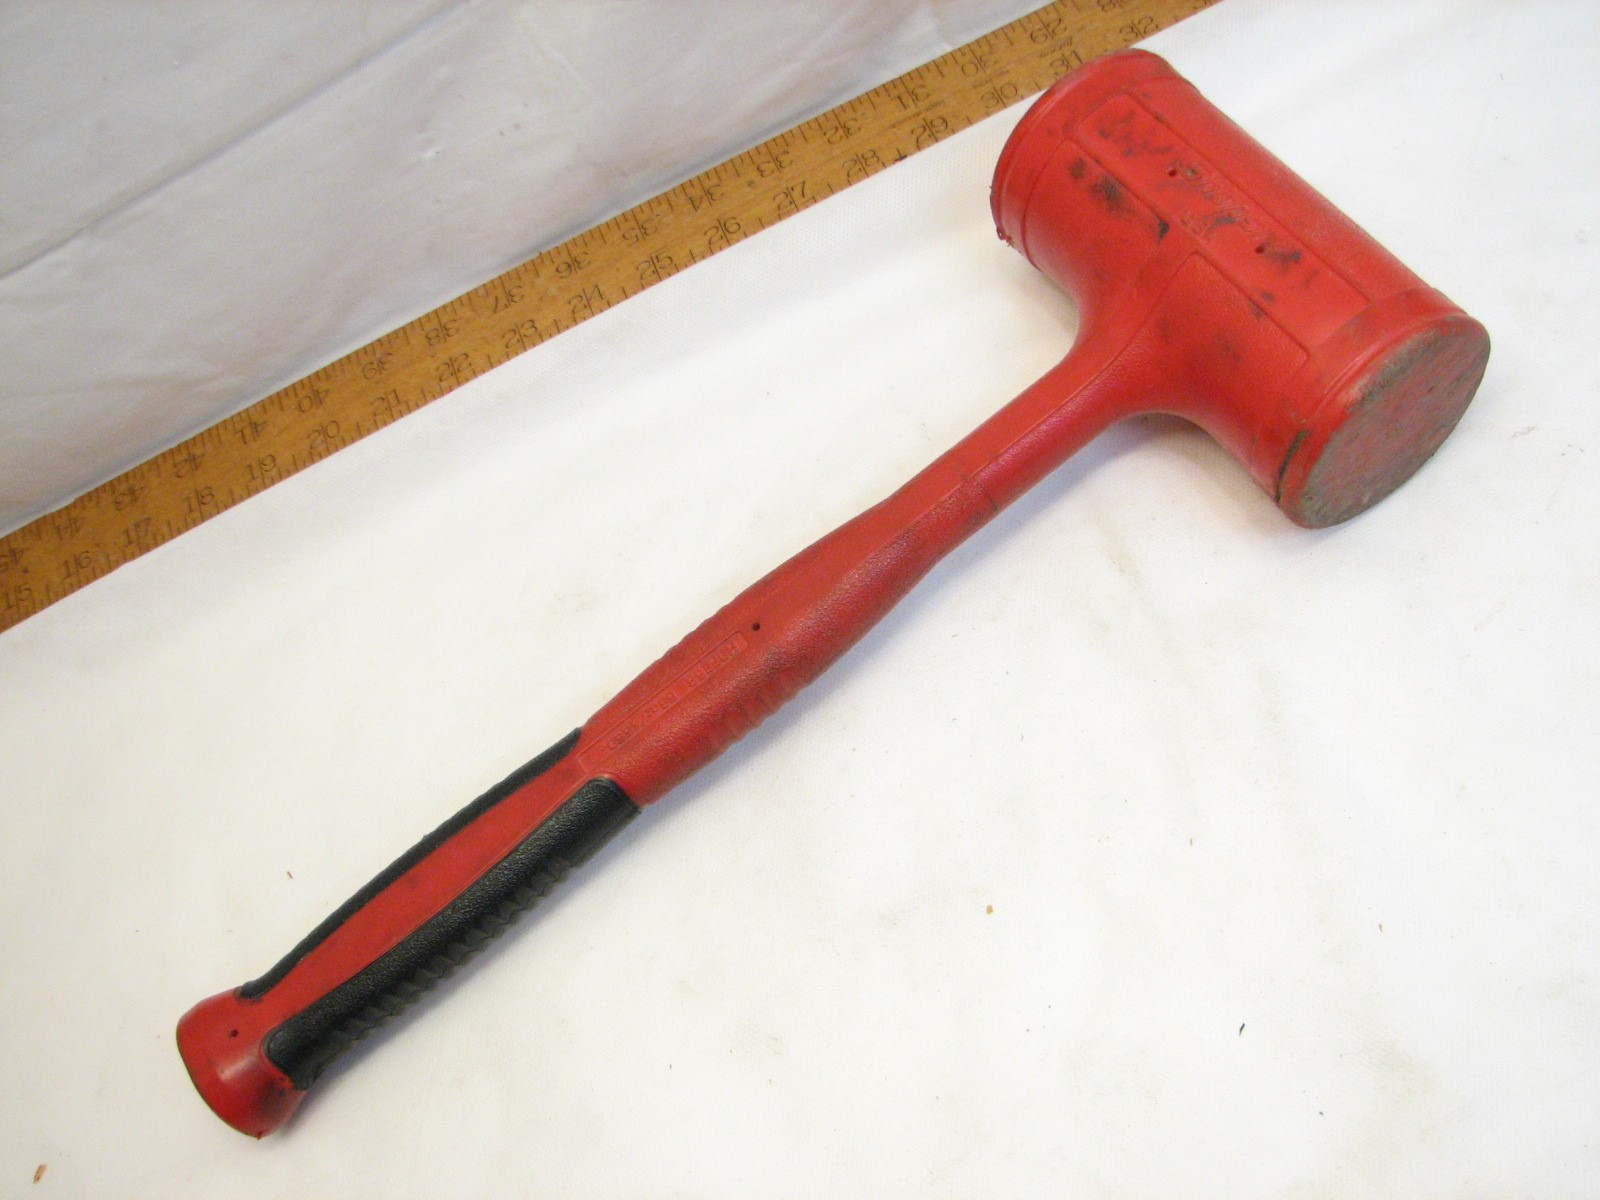 New Snap On Dead Blow Hammer Model HBFE56 56 oz Red Soft Grip Handle